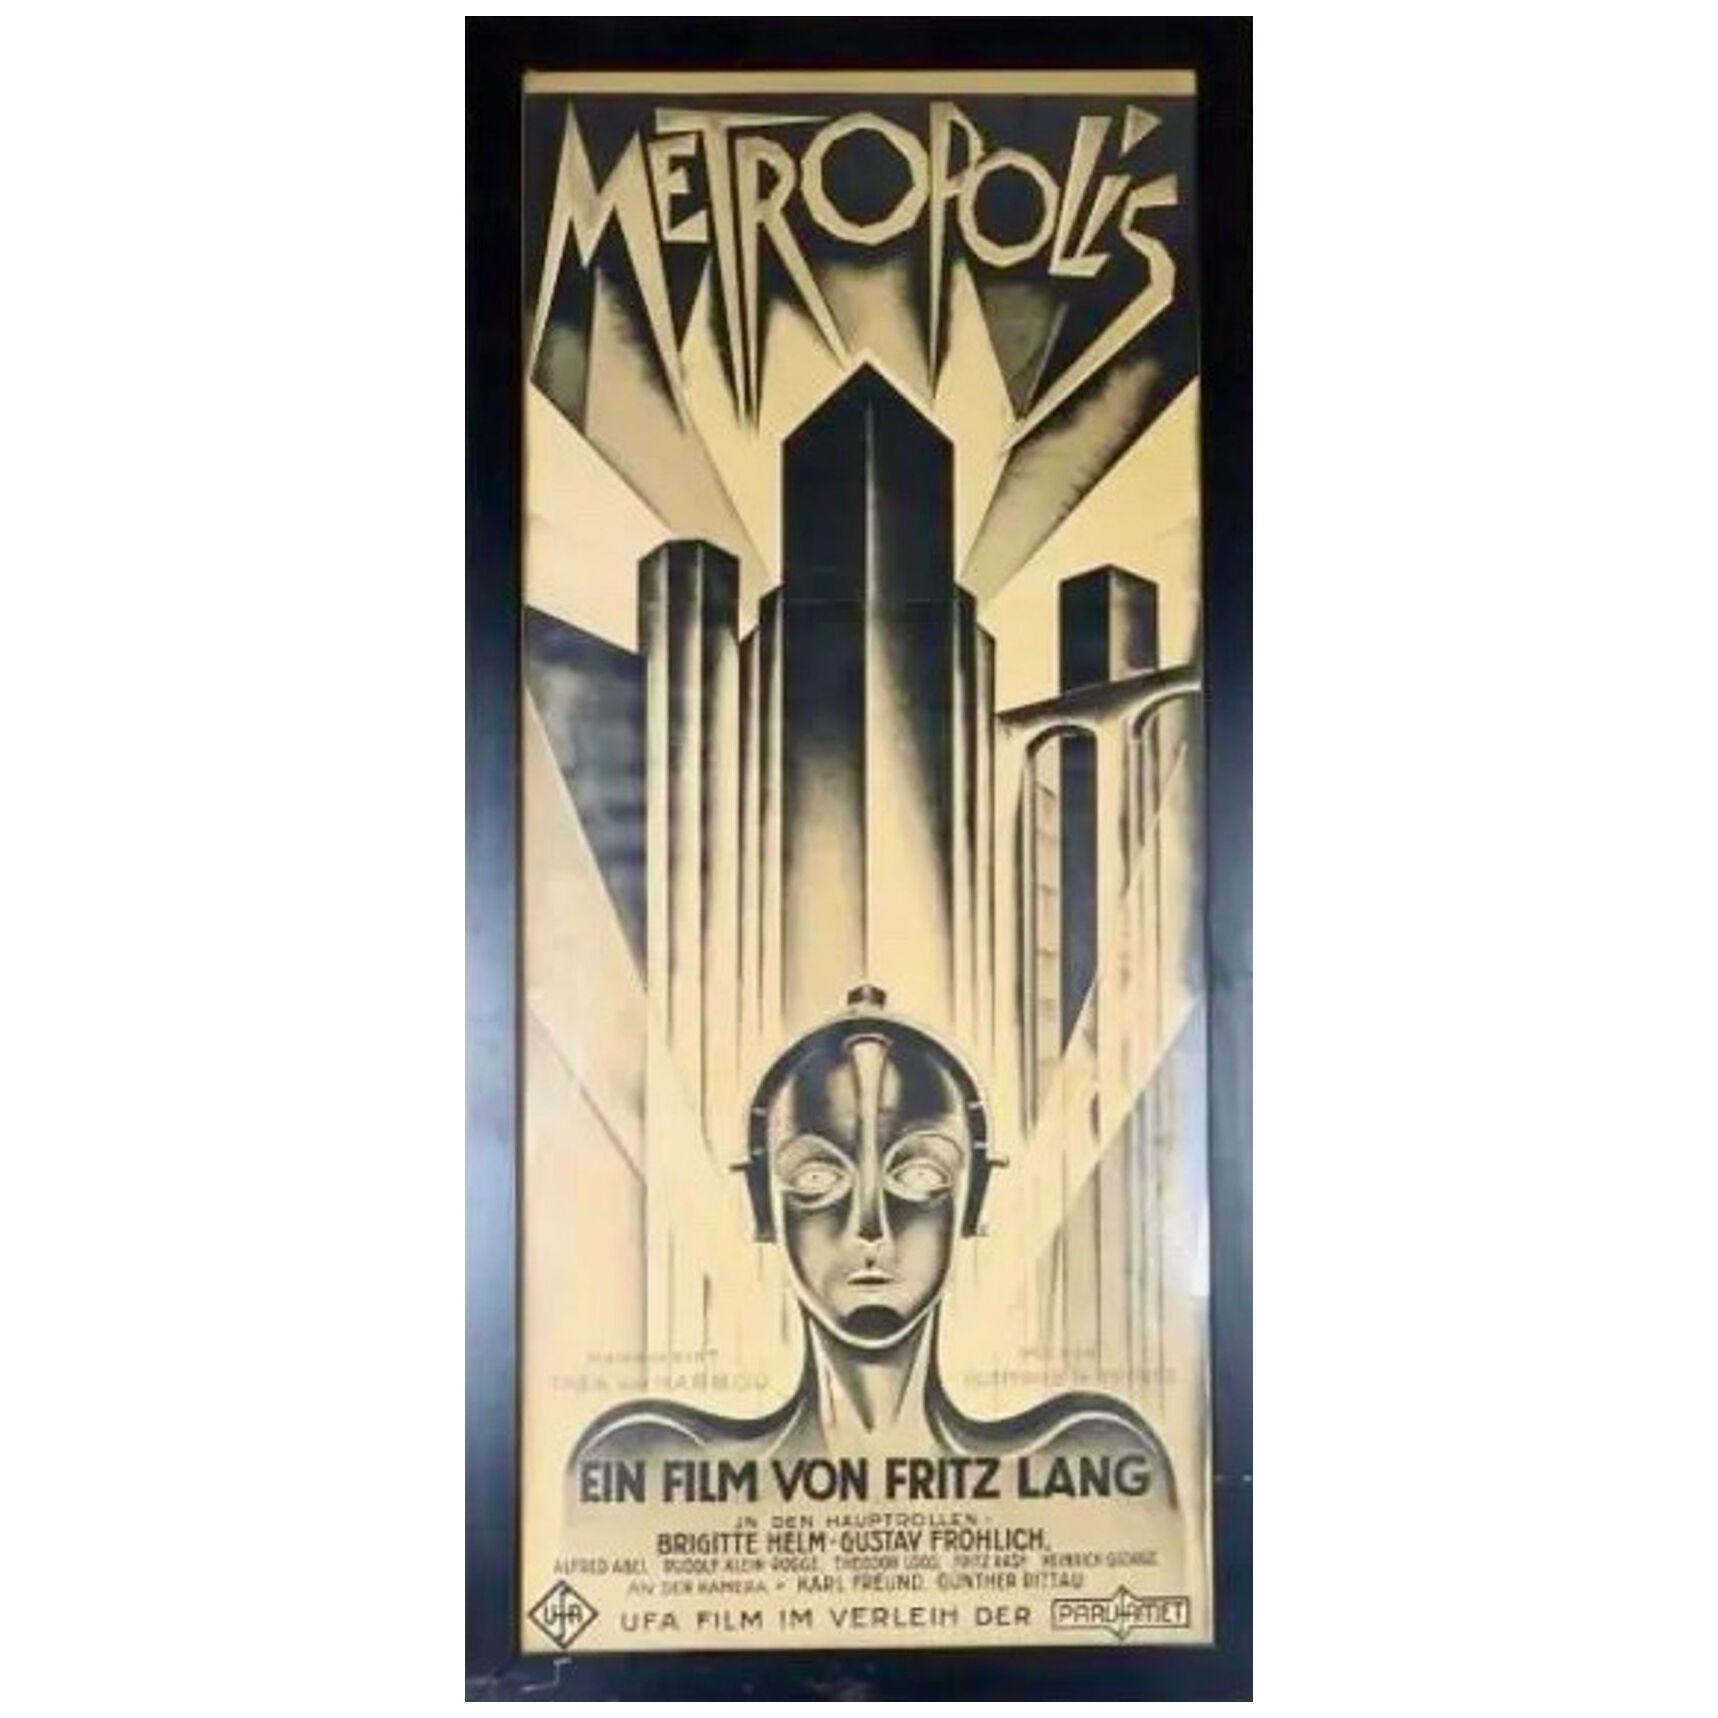 Art Deco Style Metropolis Large Framed 3-Sheet Lithograph Poster